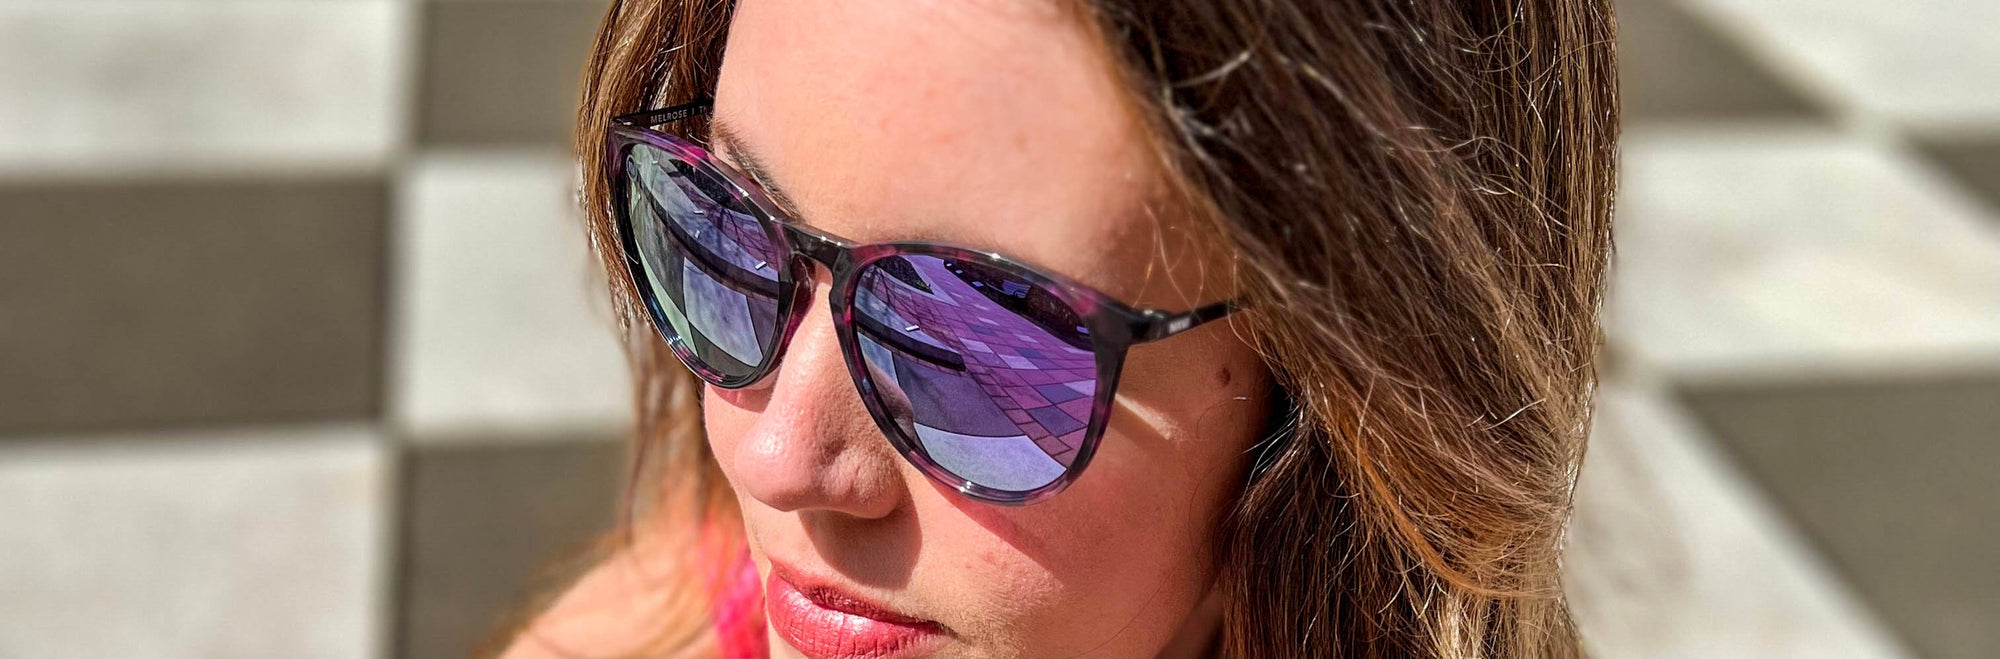 How to Choose the Perfect Sunglasses for Your Face Shape